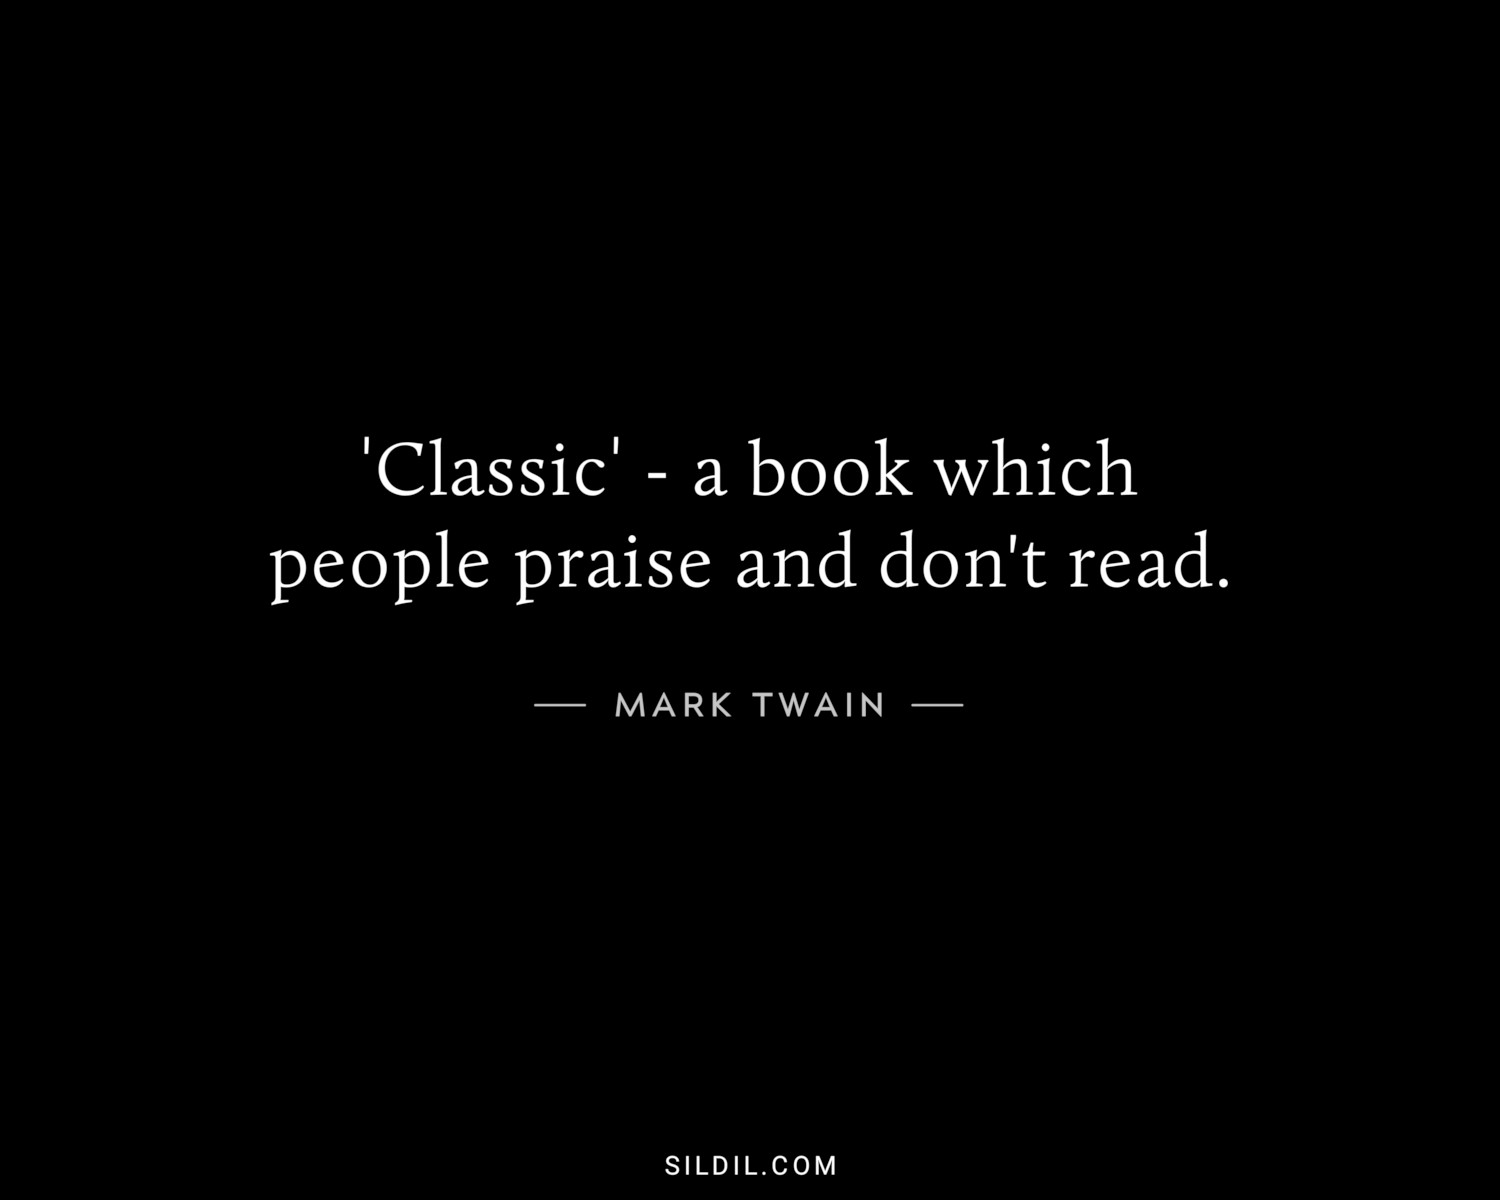 ′Classic′ - a book which people praise and don't read.